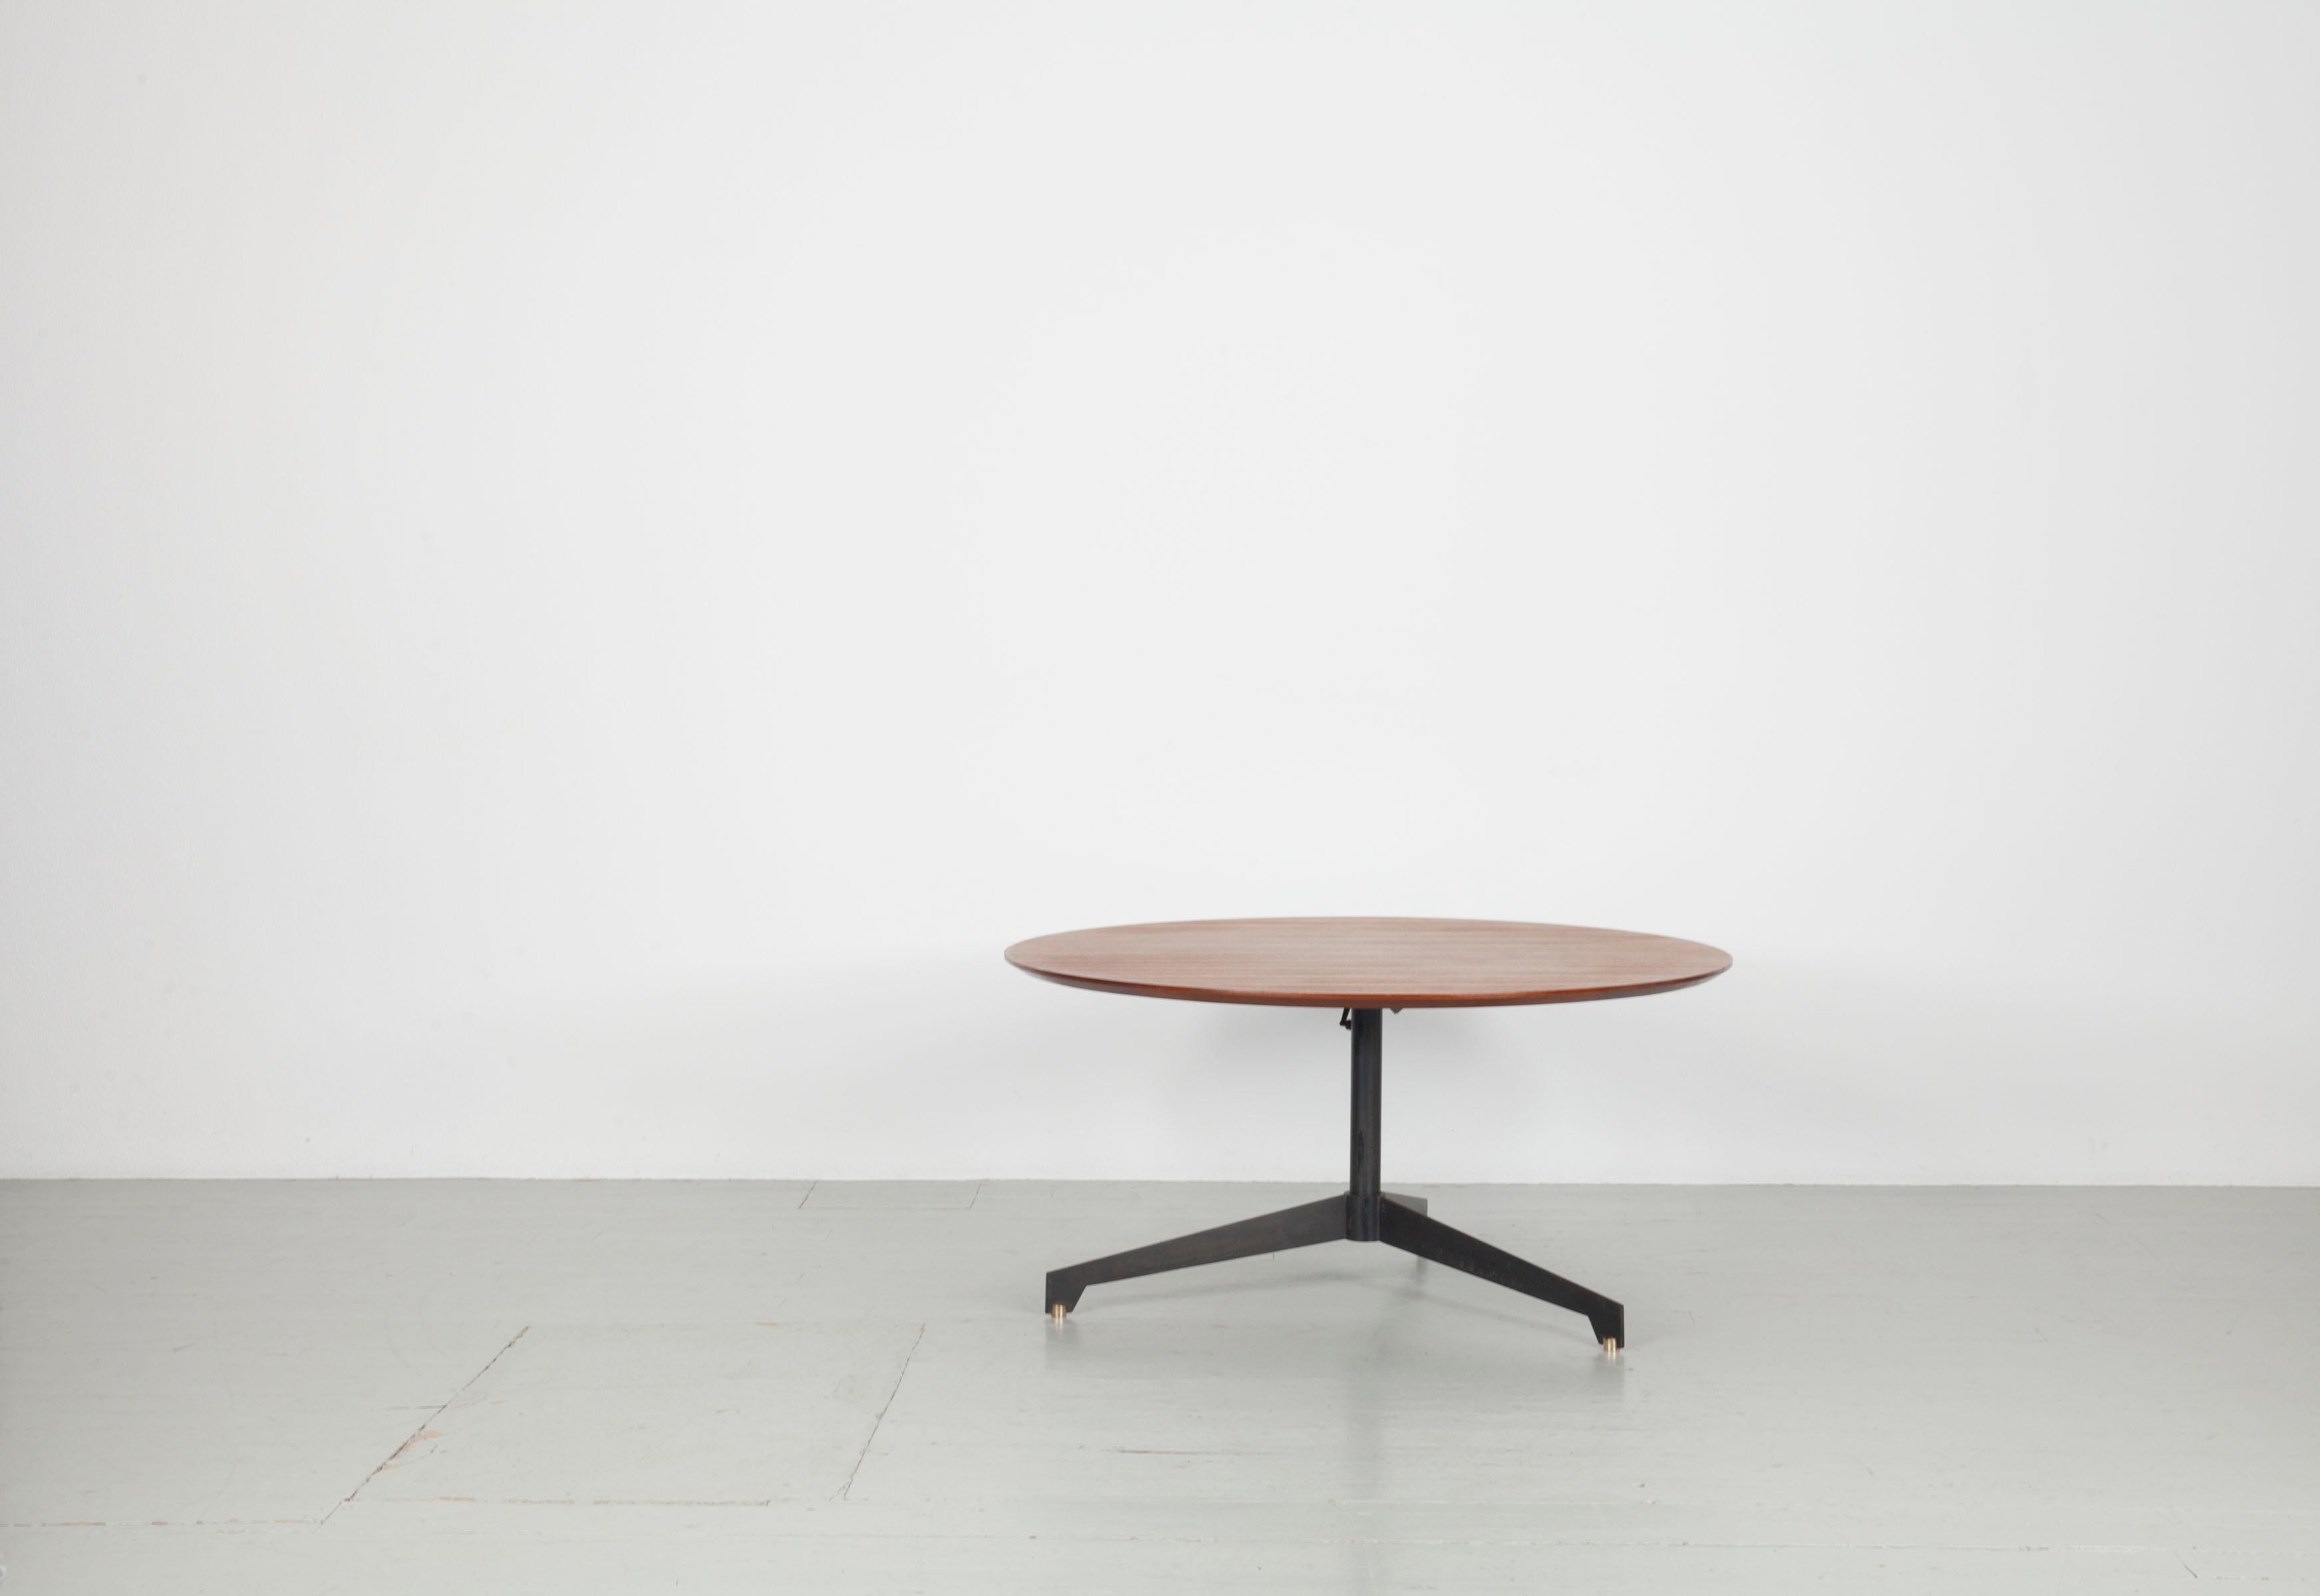 Height adjustable round teakwood table from the Italian, 1950s.

The ingenious mechanism for height adjustment is activated by a lever under the table that drives the pump located in the central shaft. When the desired height is set, the lever is